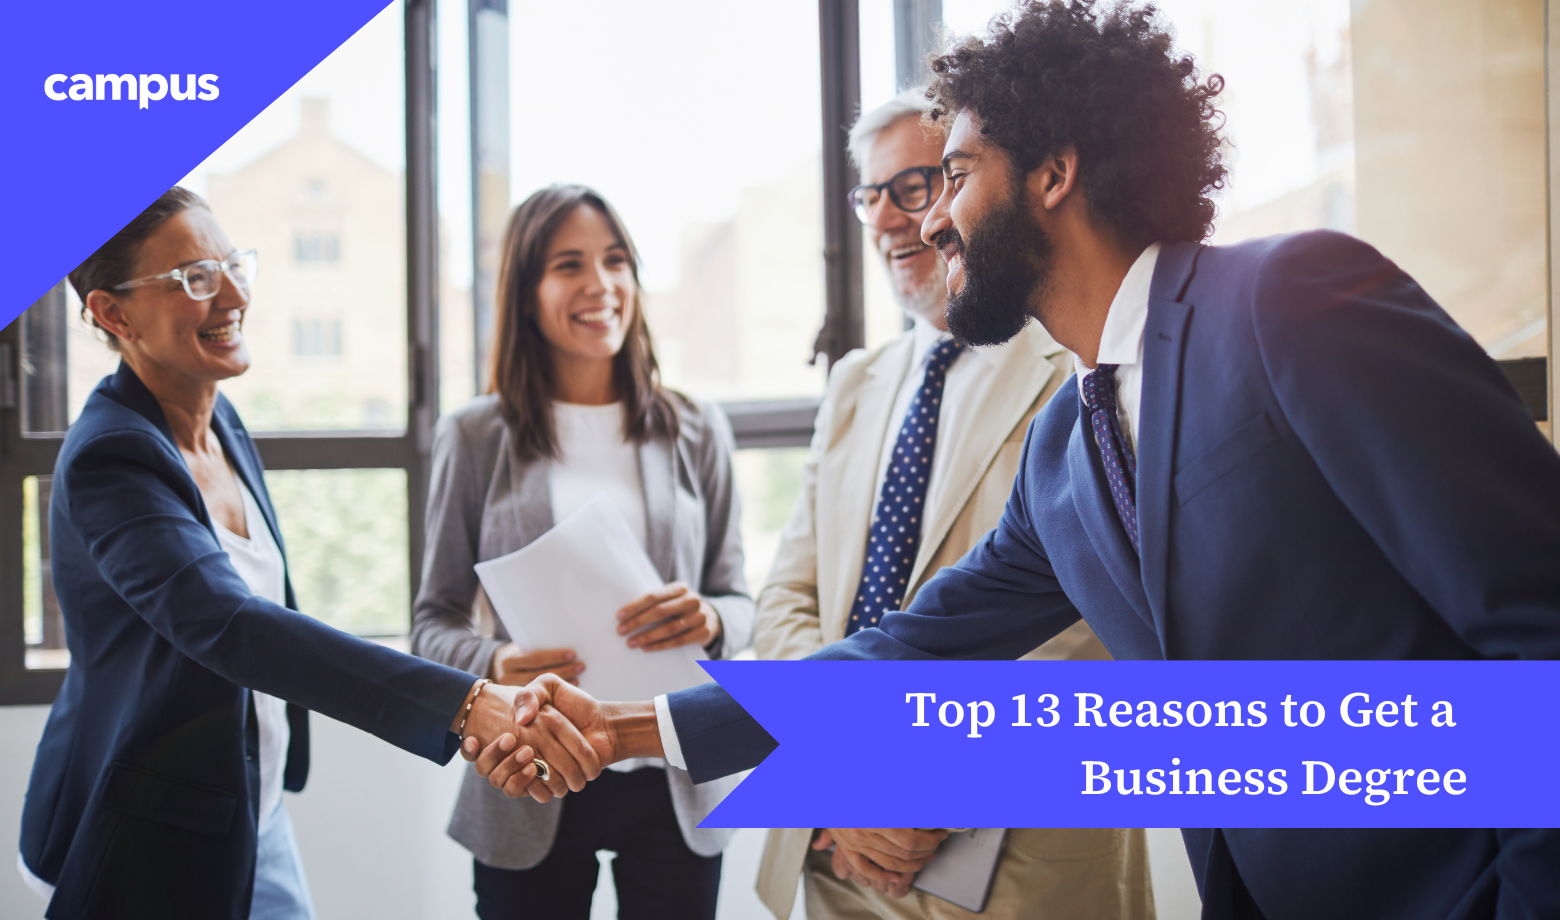 Top 13 Reasons to Get a Business Degree